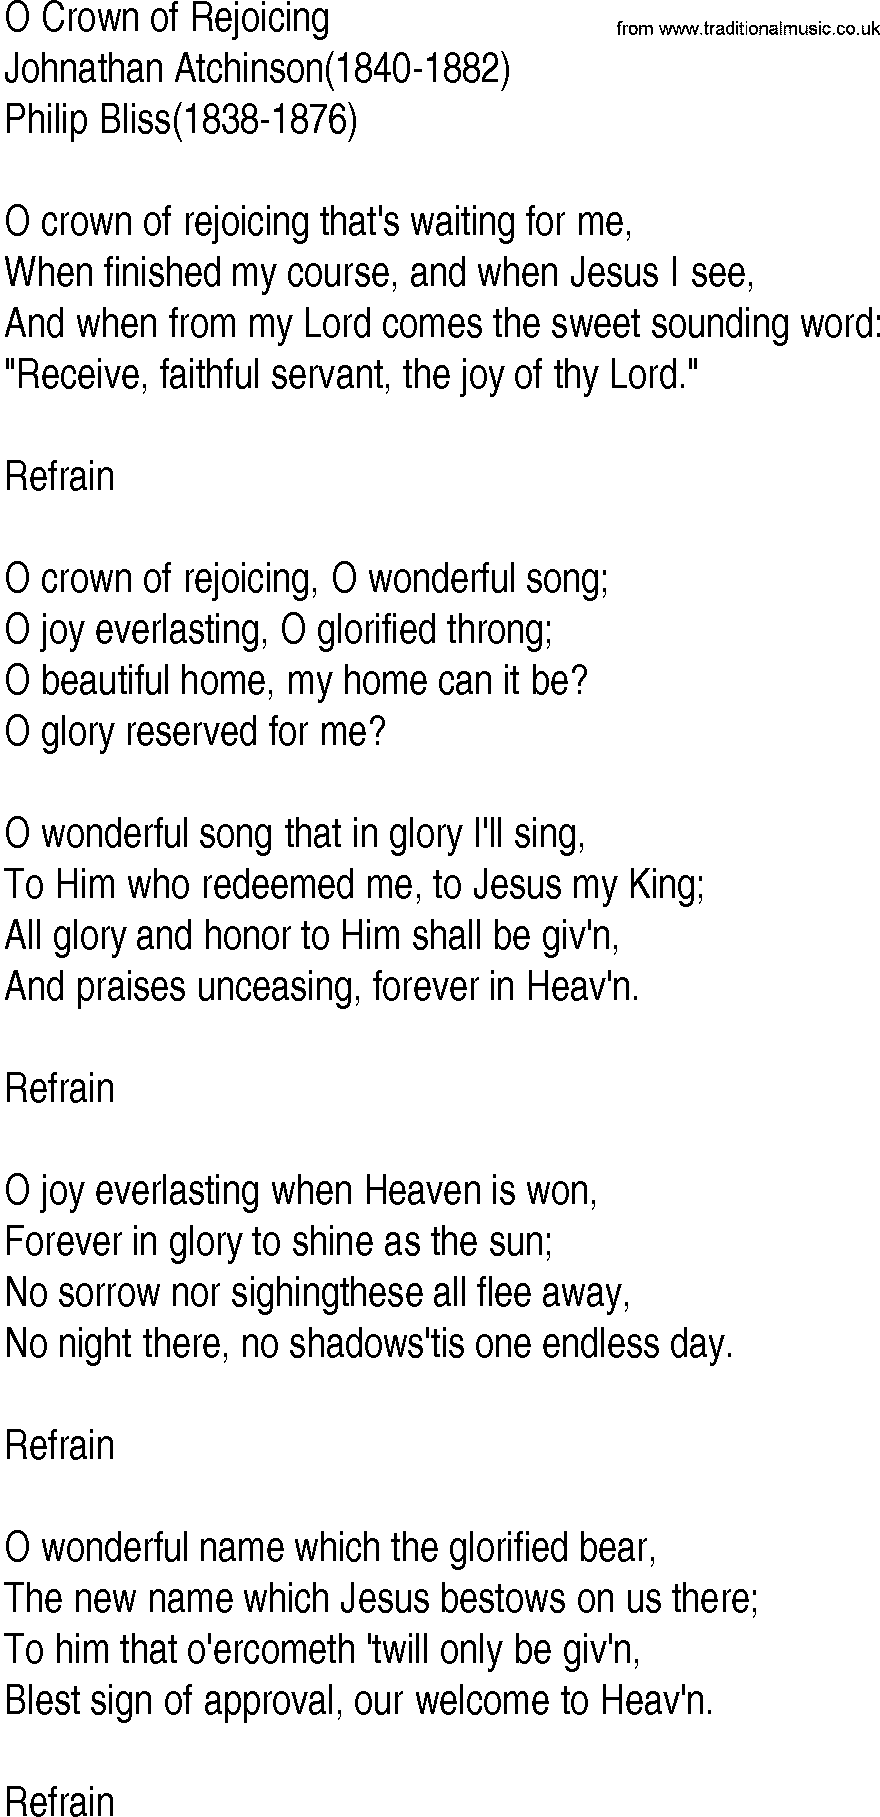 Hymn and Gospel Song: O Crown of Rejoicing by Johnathan Atchinson lyrics